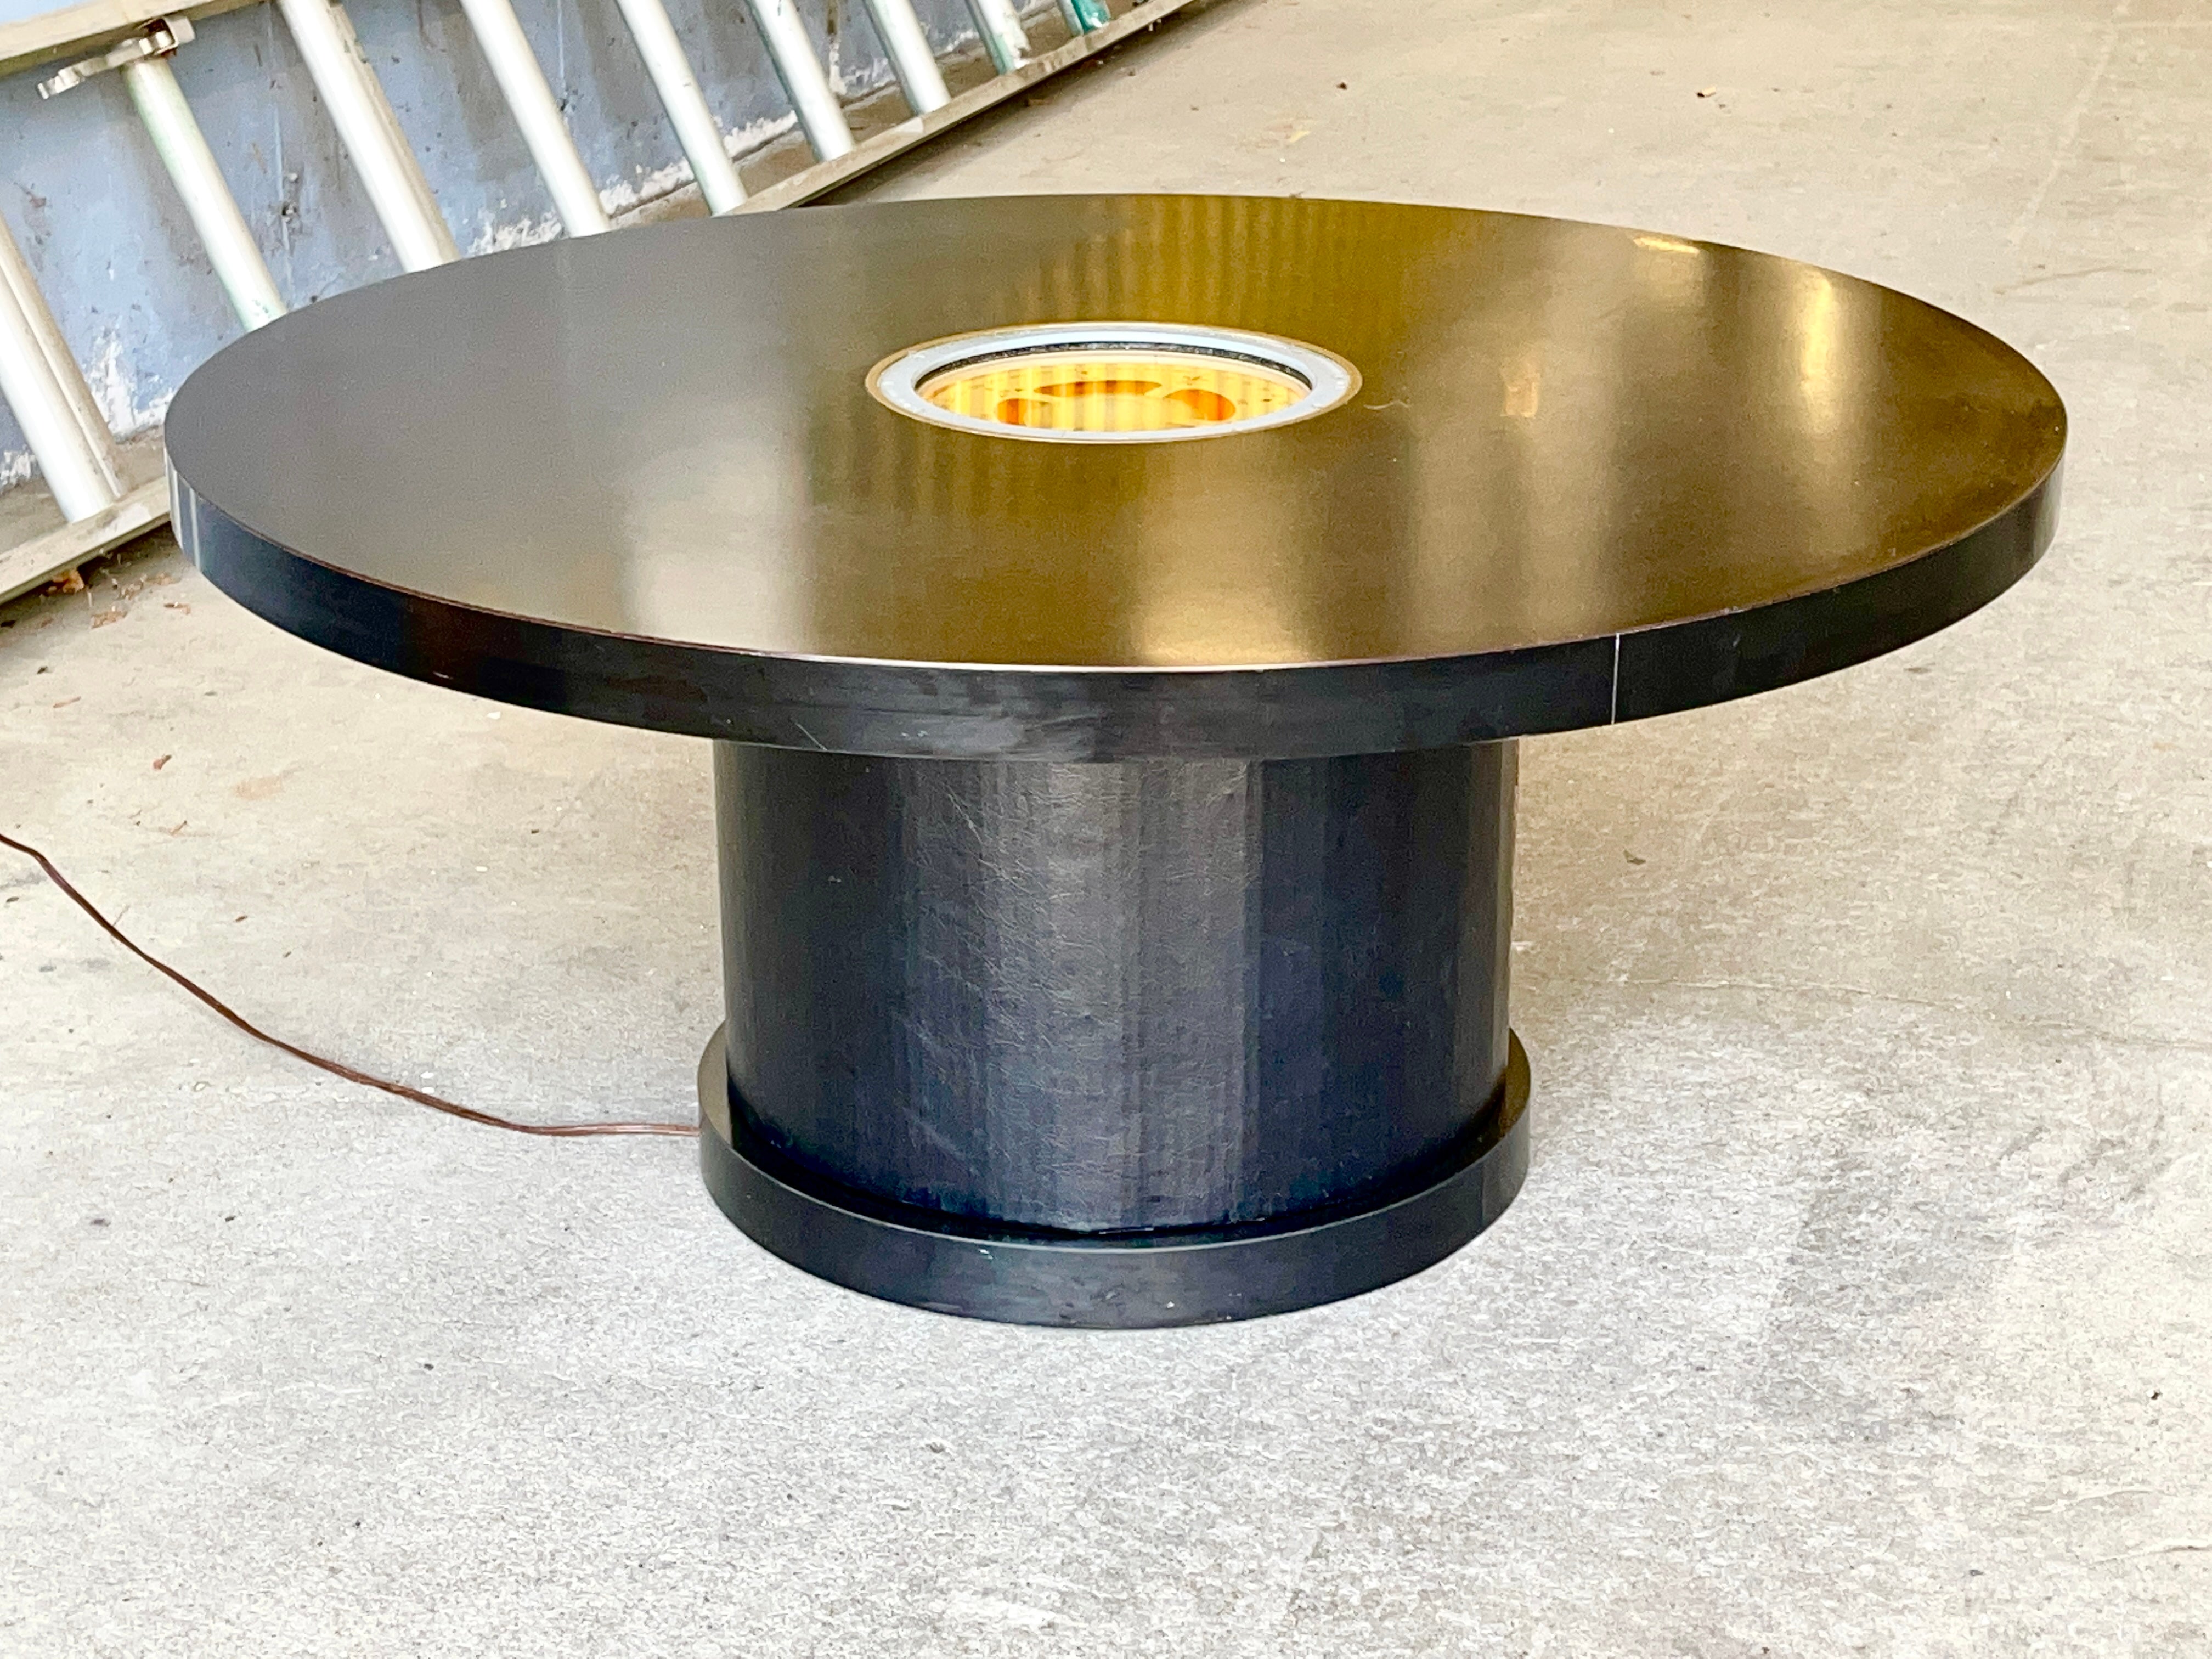 Round black laminate coffee table on recessed columnar pedestal base. Top inset with U.S. Navy gimbaled compass manufactured by the Lionel Corporation, New York. As part of the US War Production effort Lionel ceased making model trains and retooled